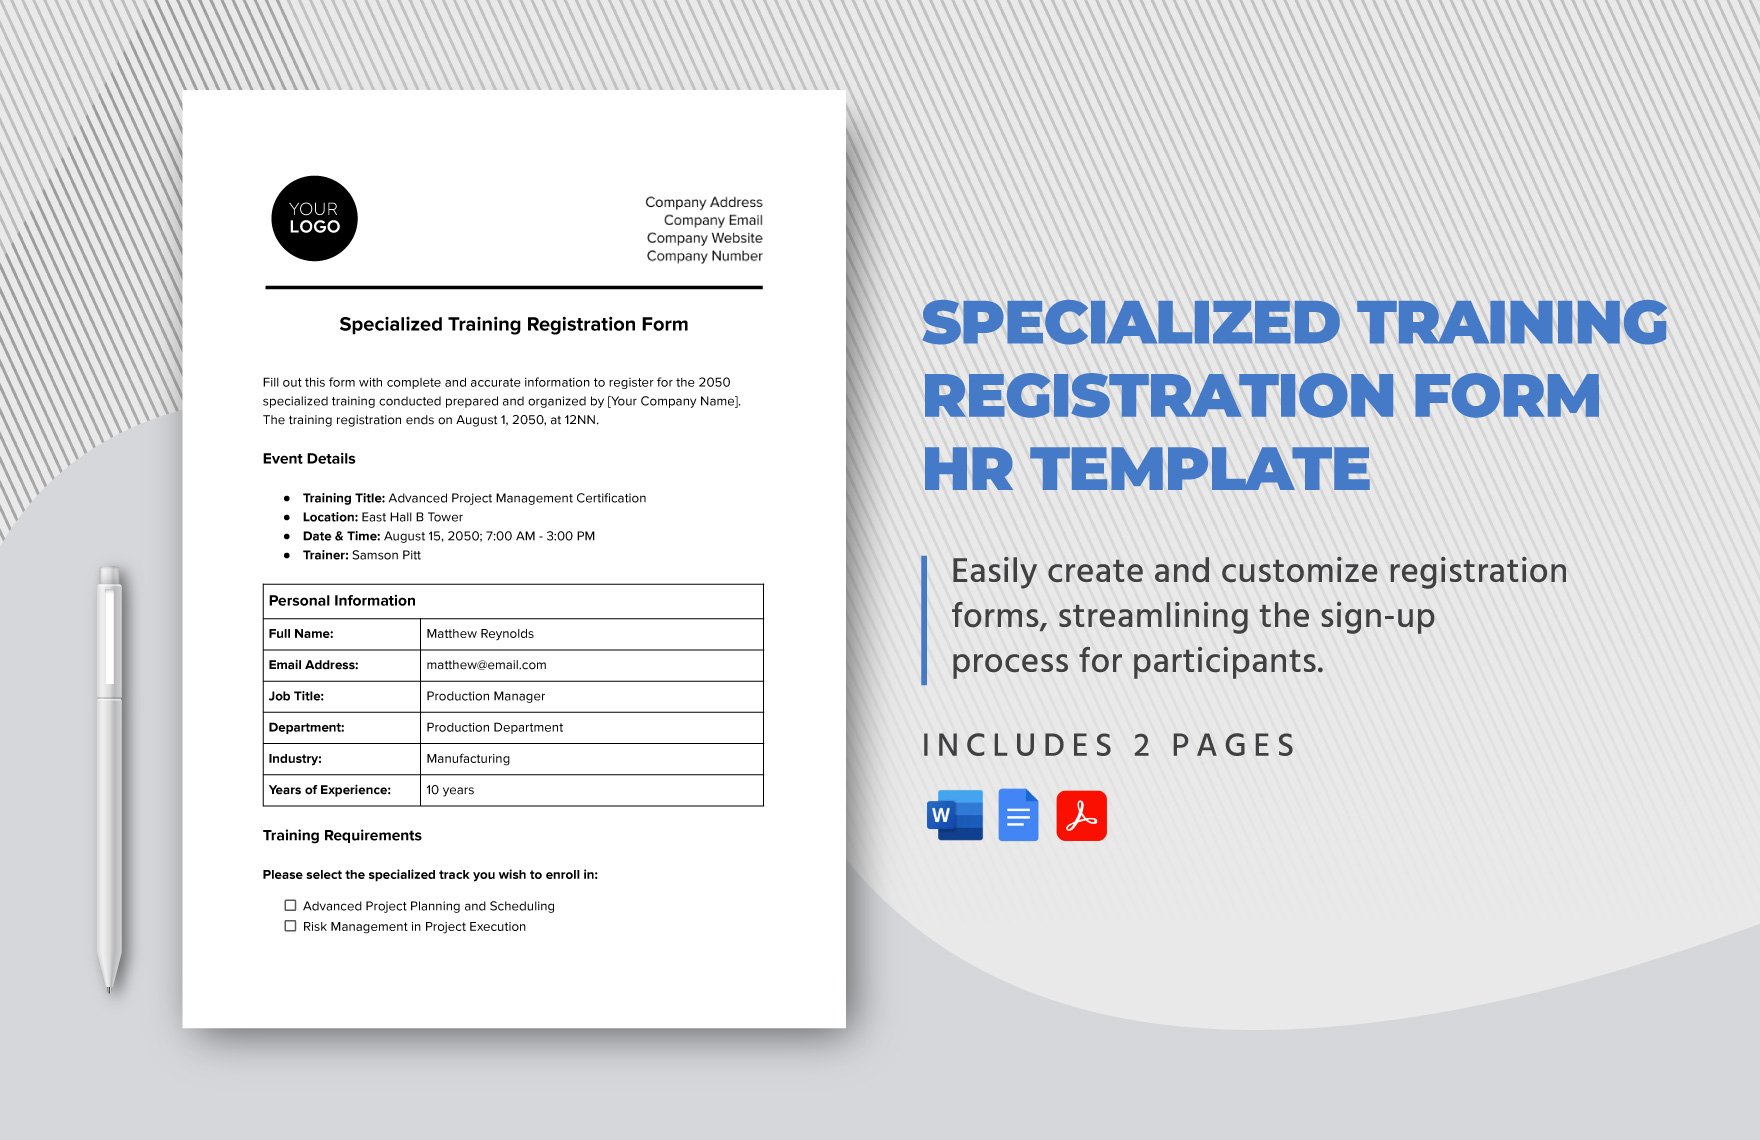 Specialized Training Registration Form HR Template in Word, Google Docs, PDF